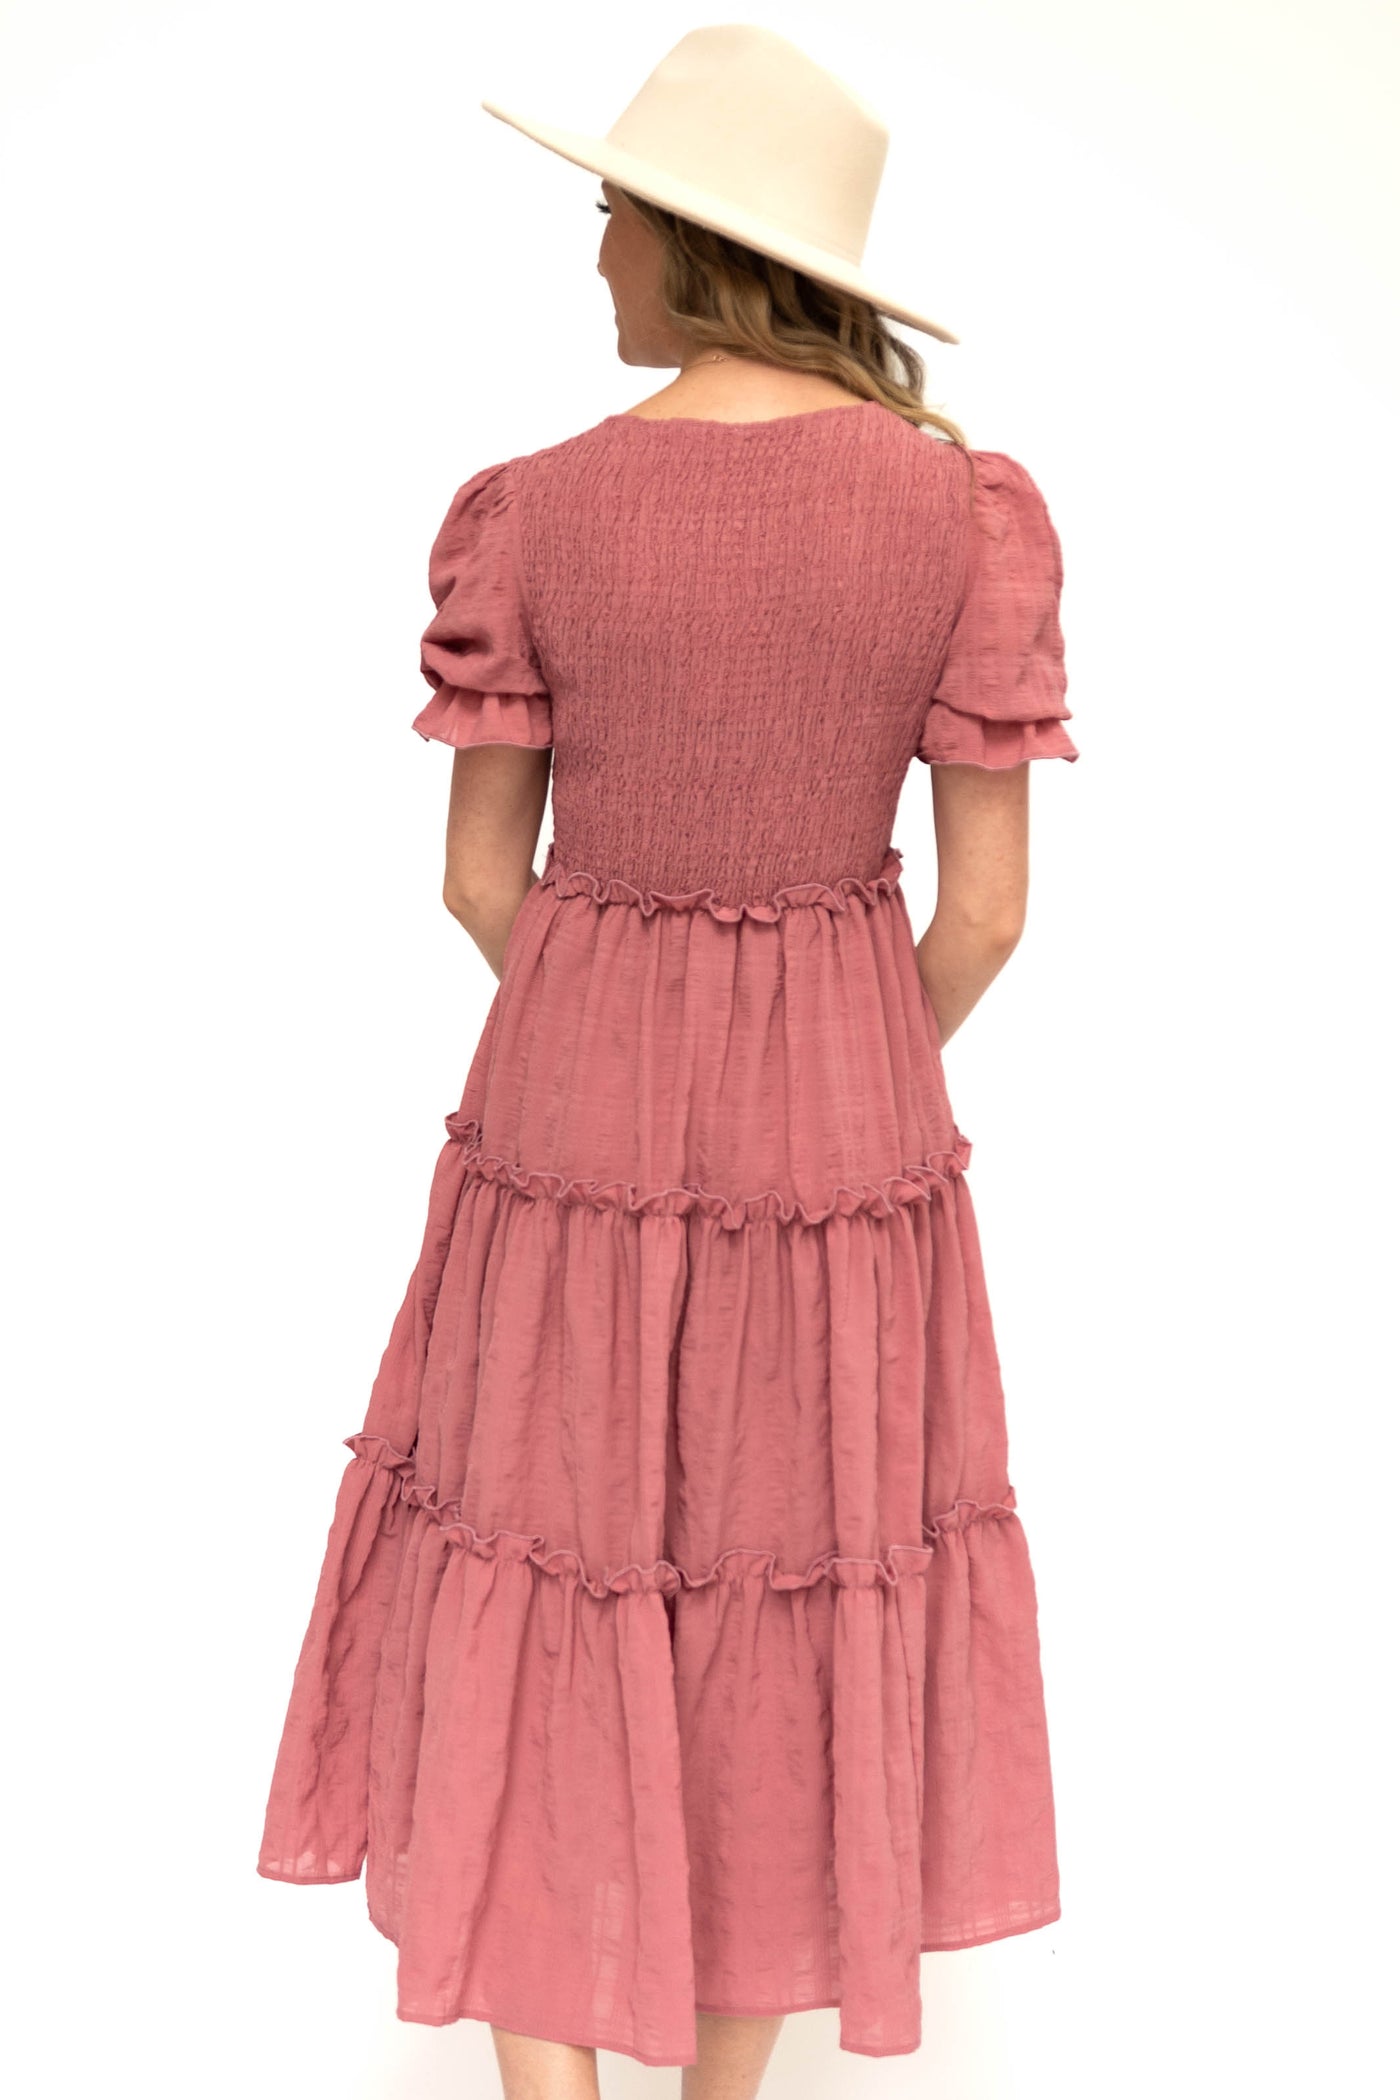 Back view of a rose dress